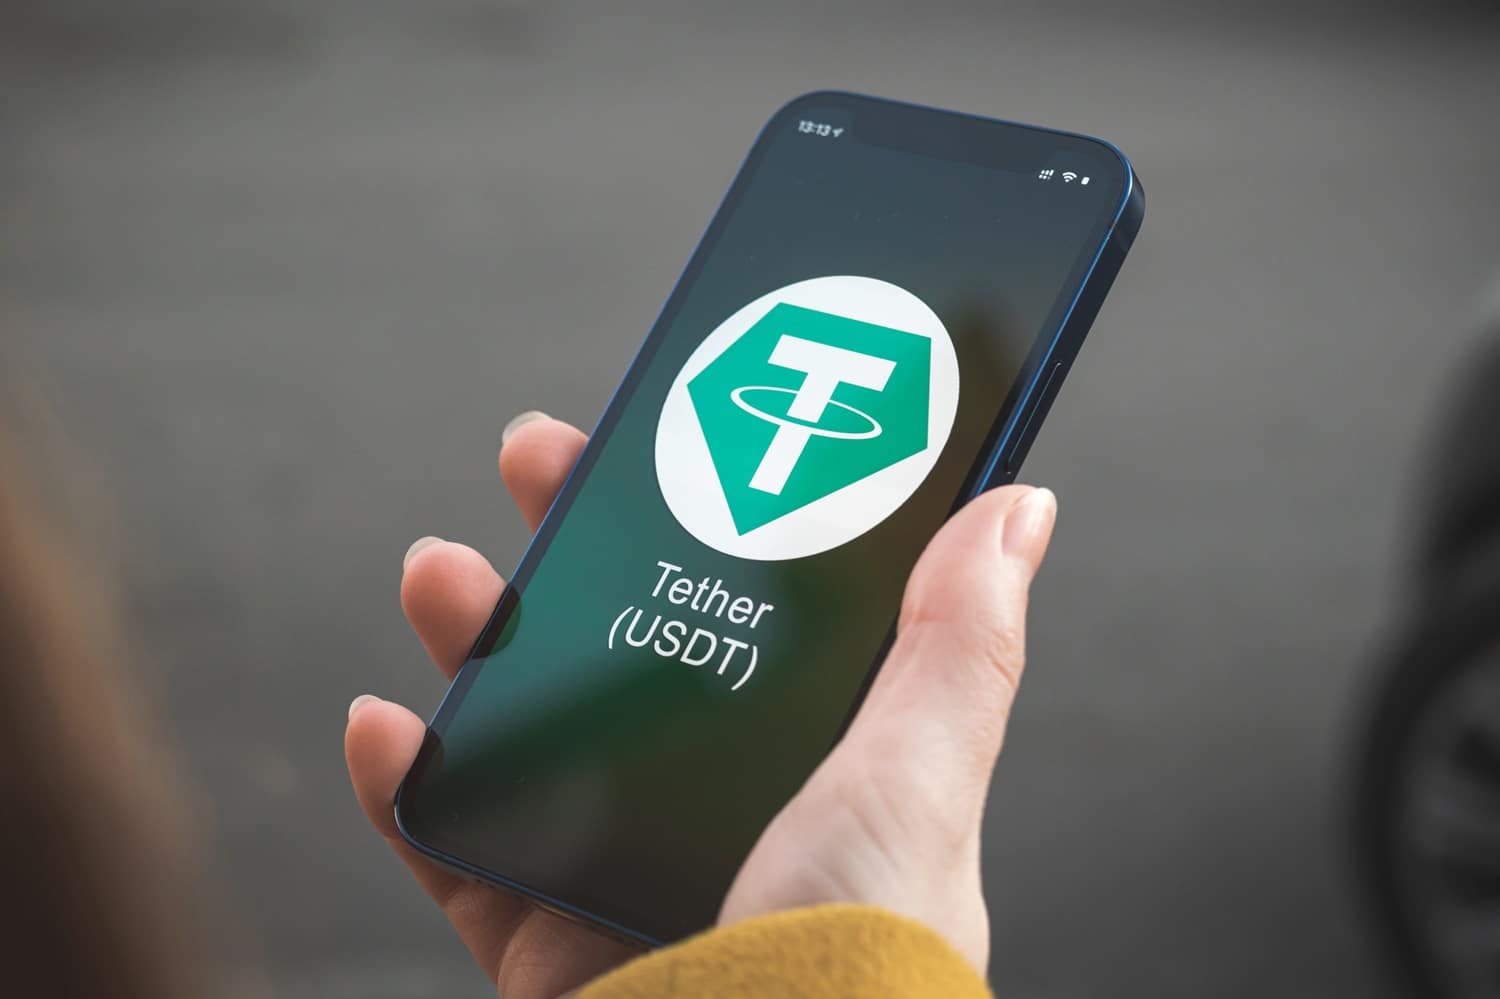 A person’s hand holds a smartphone with the Tether USDT cryptoasset symbol and logo on its screen.